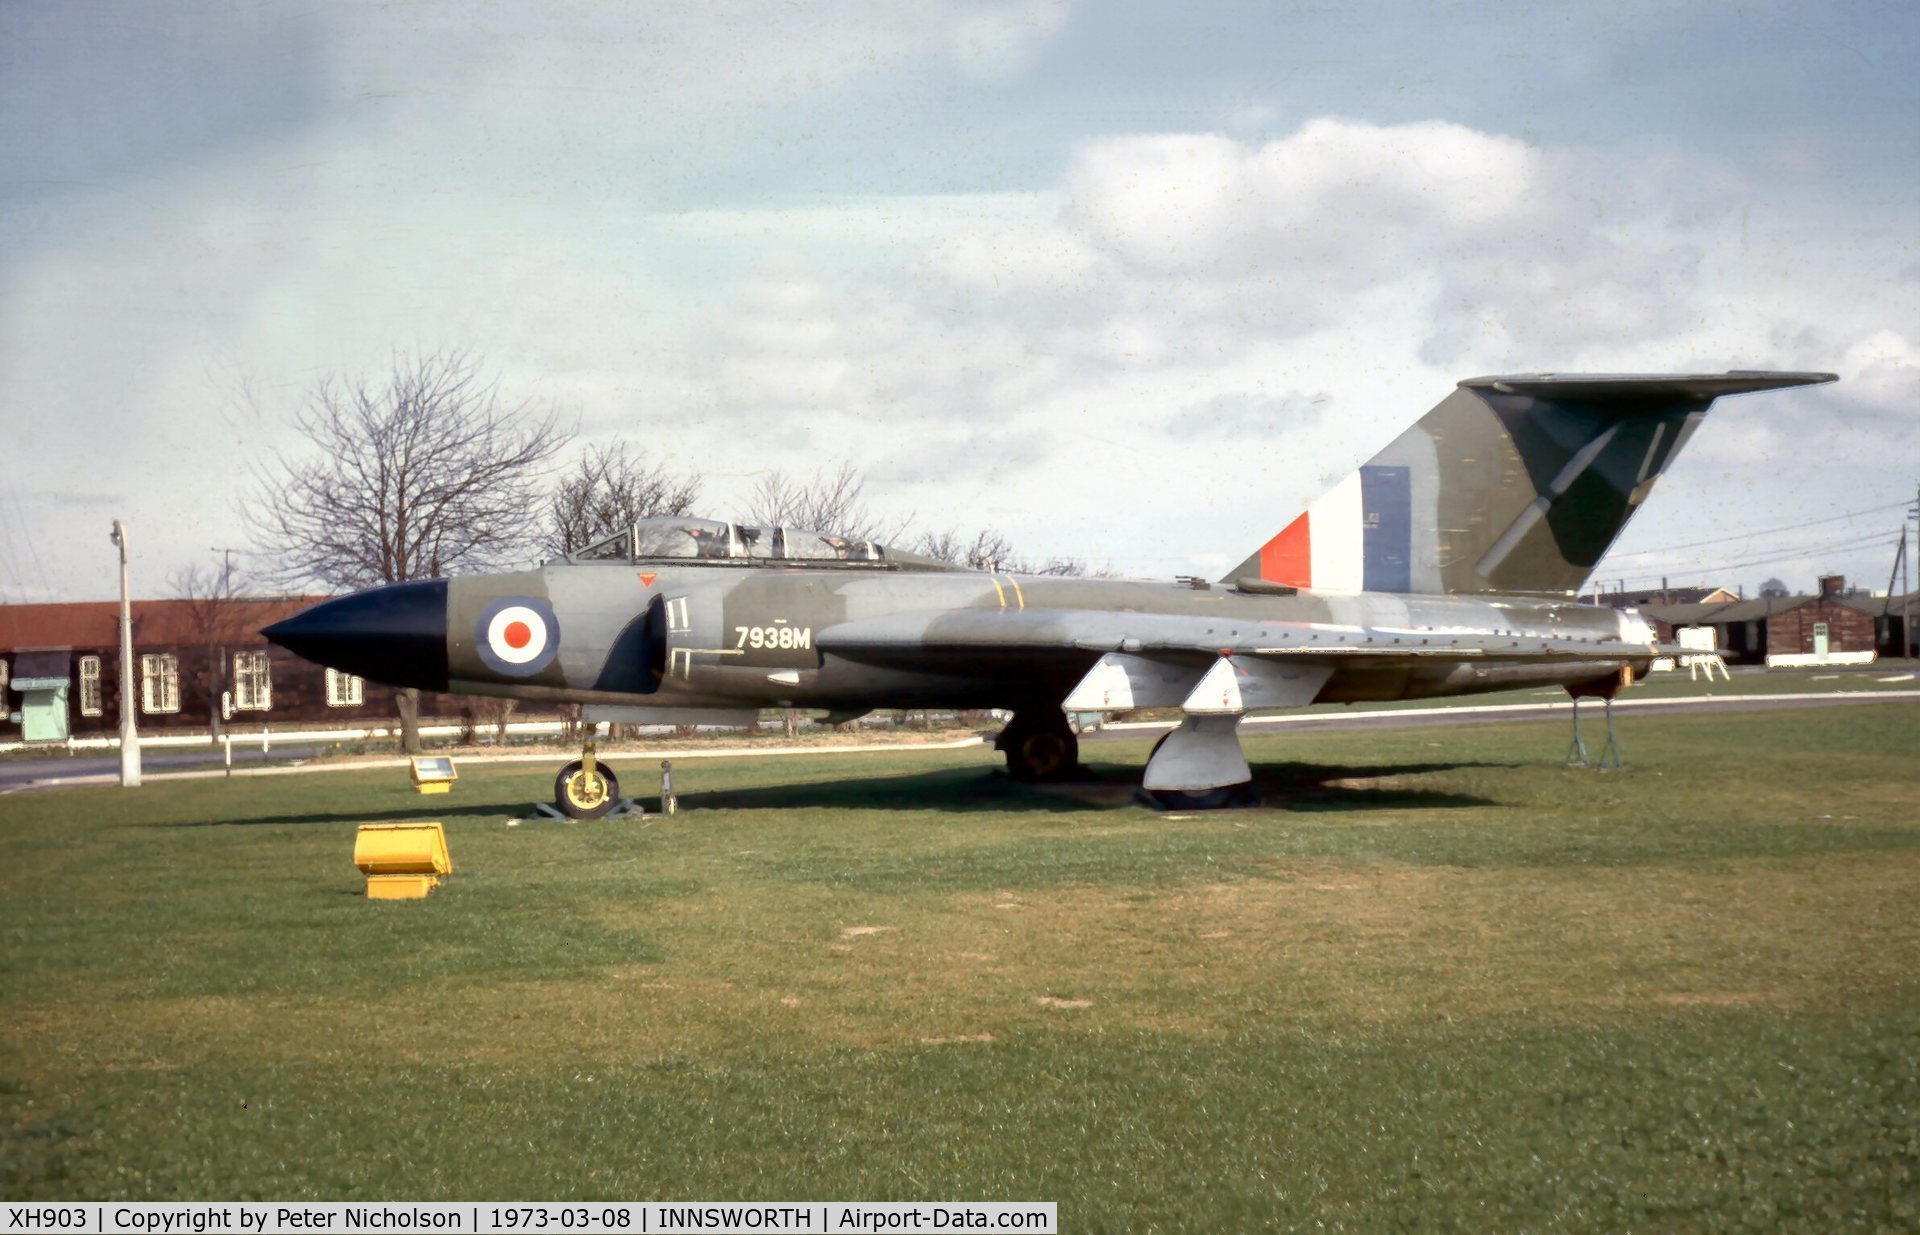 XH903, Gloster Javelin FAW.9 C/N Not found XH903, An earlier photograph of RAF Innsworth's gate guardian, showing the RAF maintenance serial 7938M.